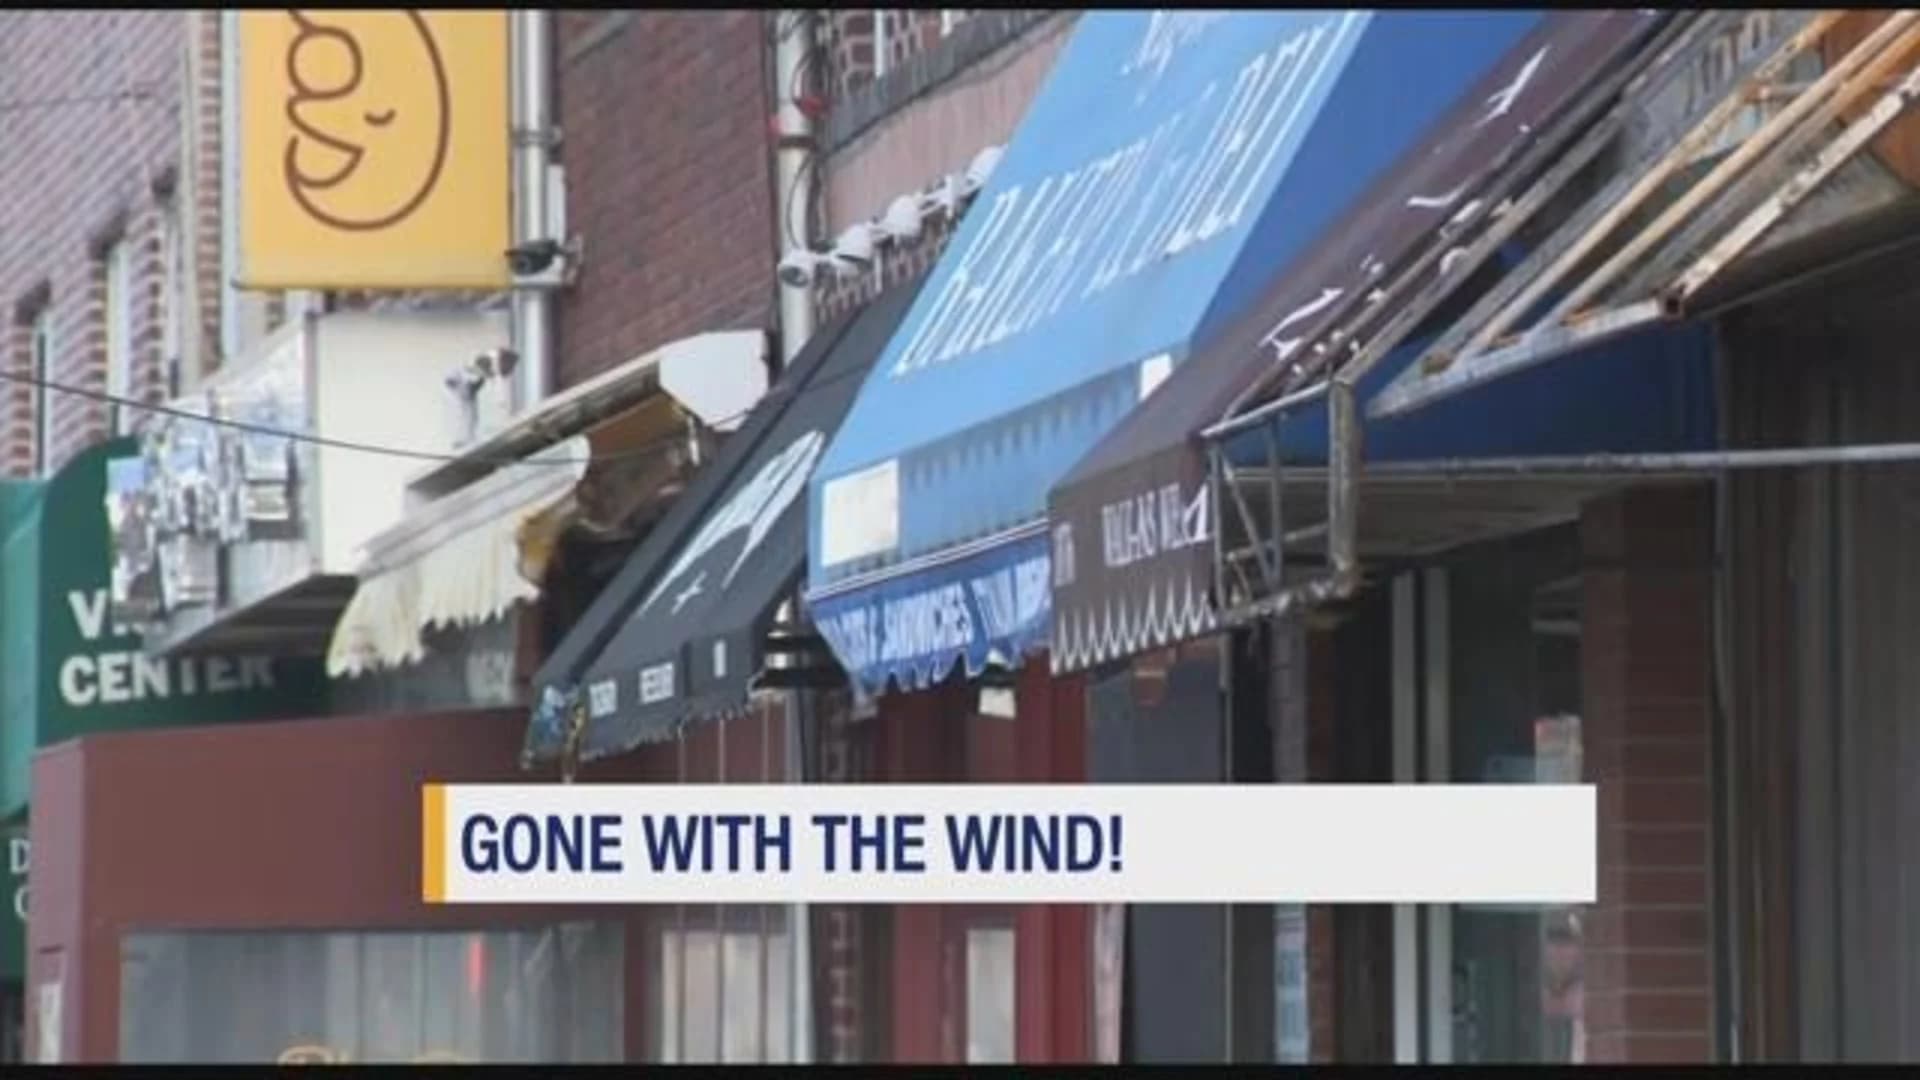 Whipping winds bring blustery start to week in the Bronx